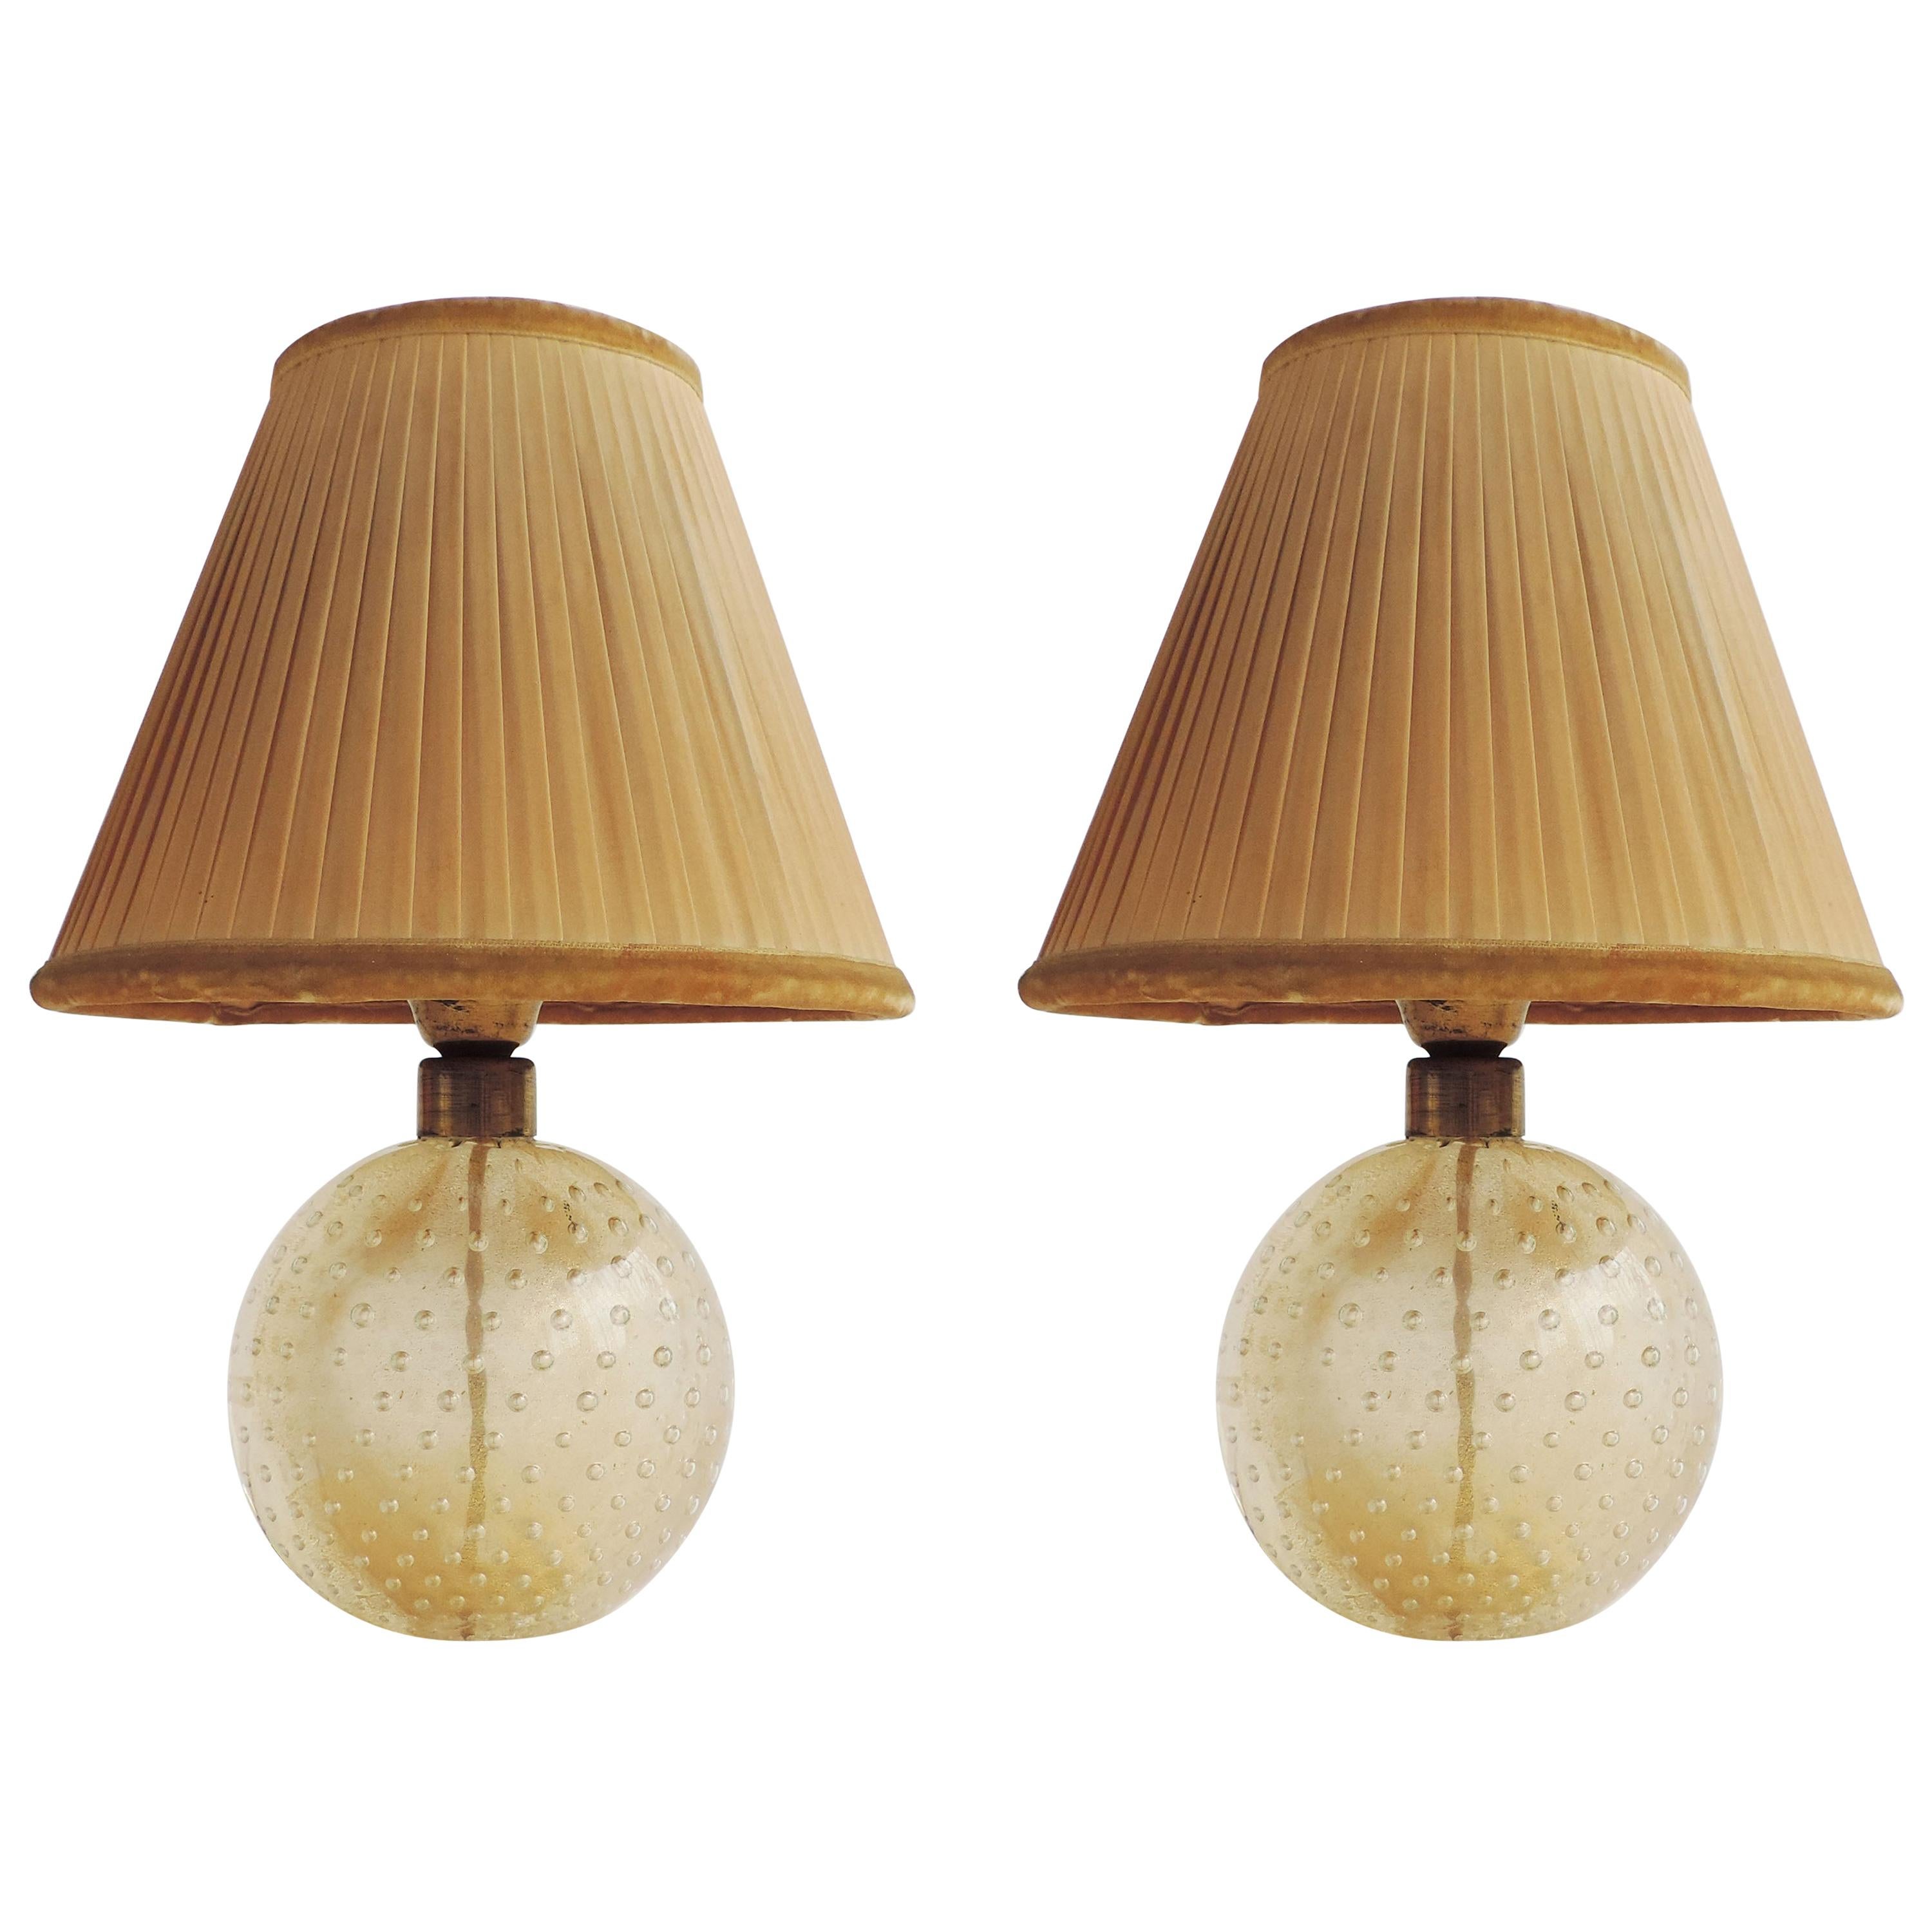 Seguso Pair of Murano Glass Table Lamps, Italy, 1940s